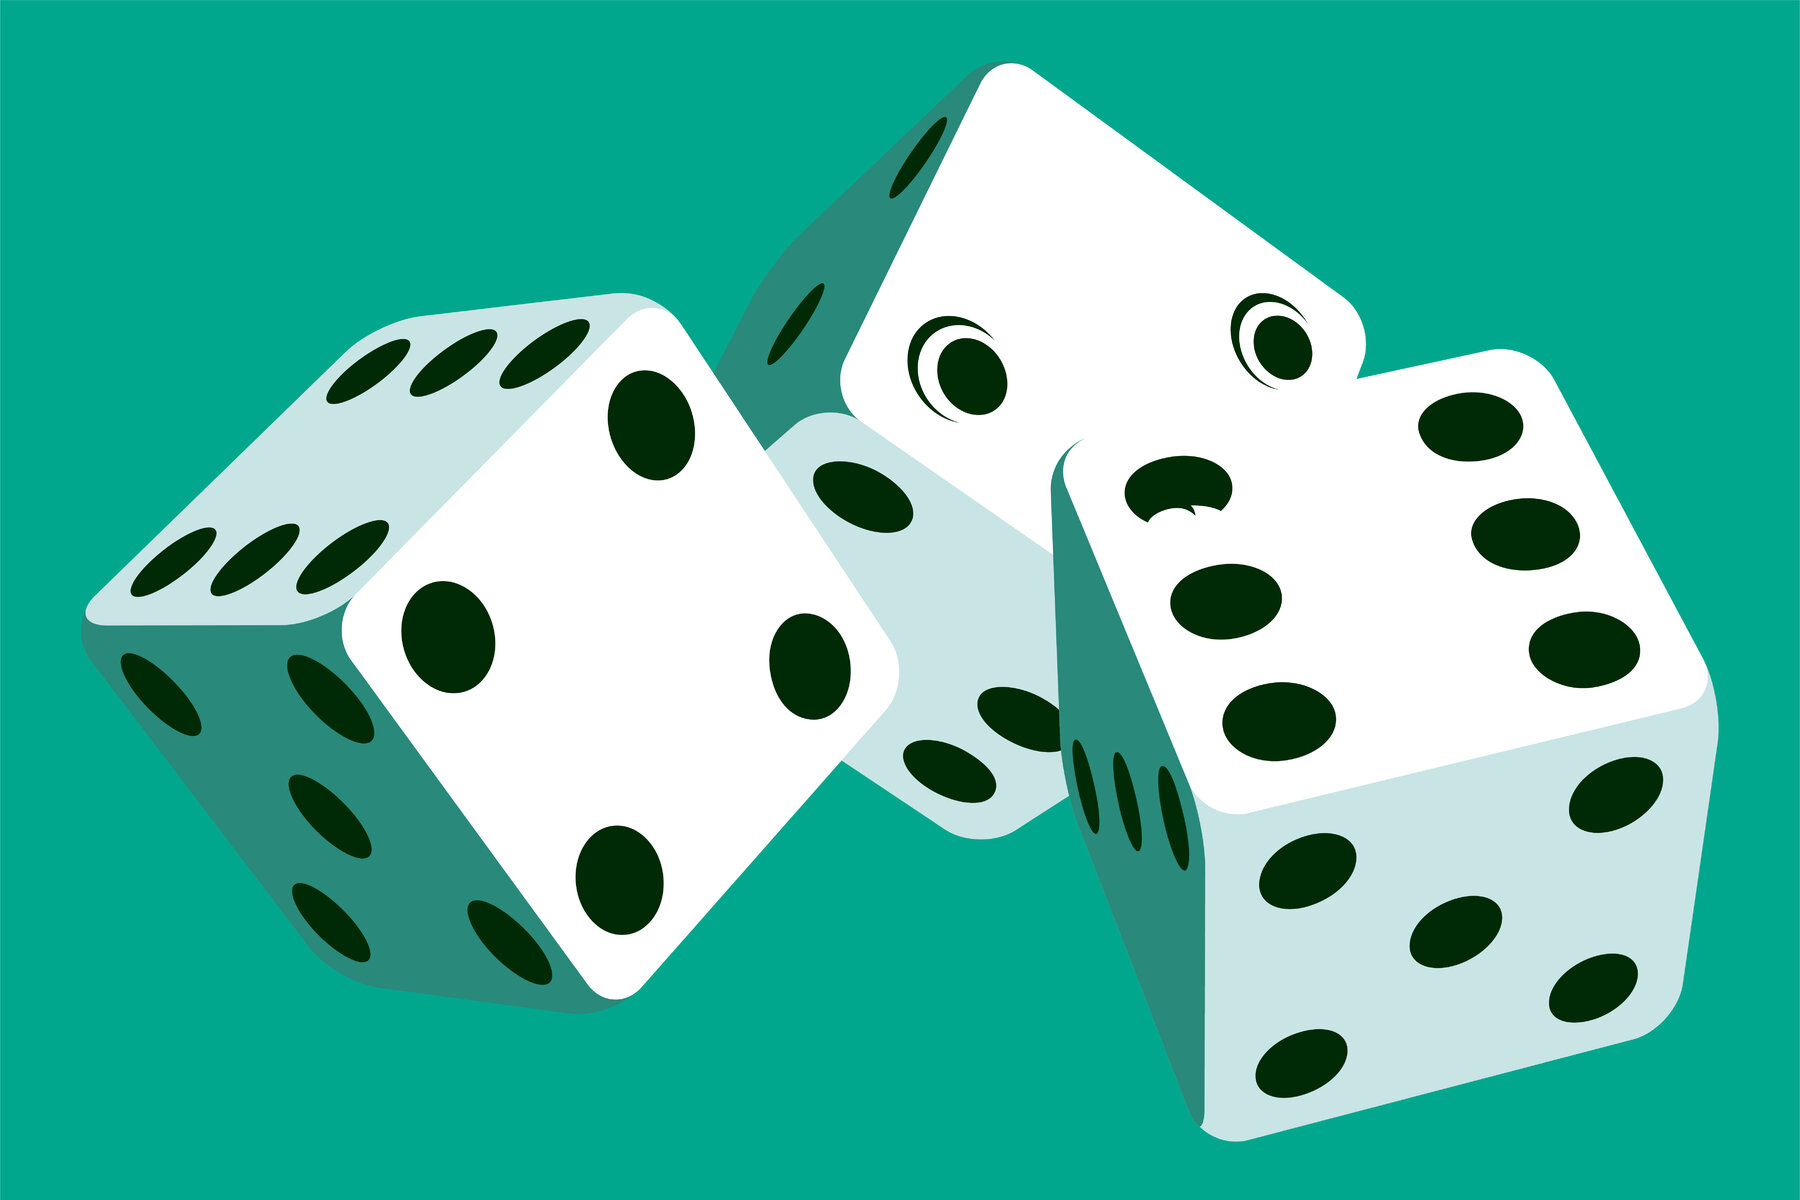 Three pieces of dice with a turquoise-colored background